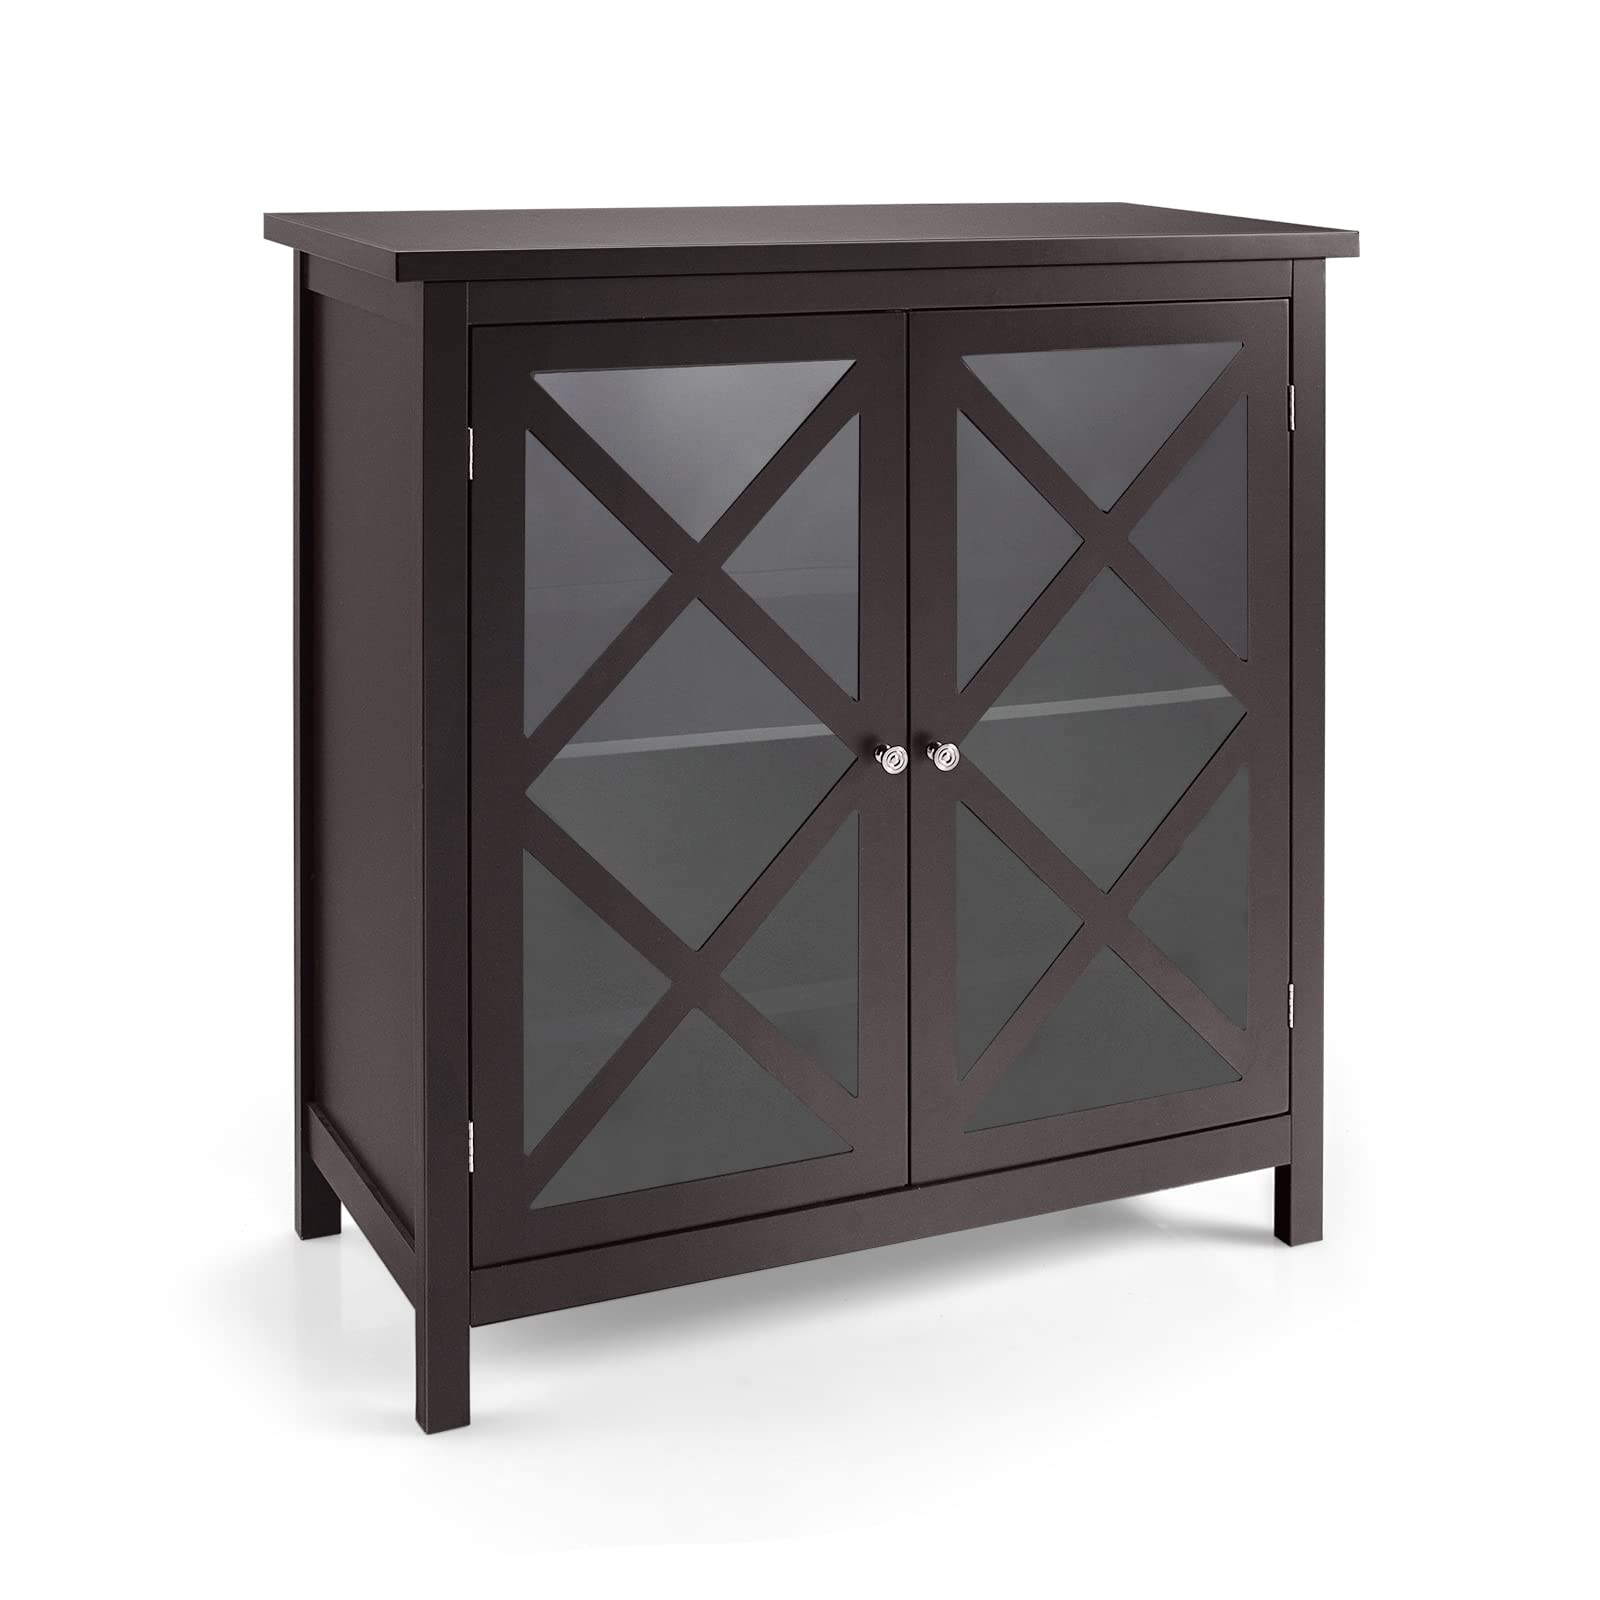 Giantex Buffet Cabinet with Storage, Kitchen Sideboard